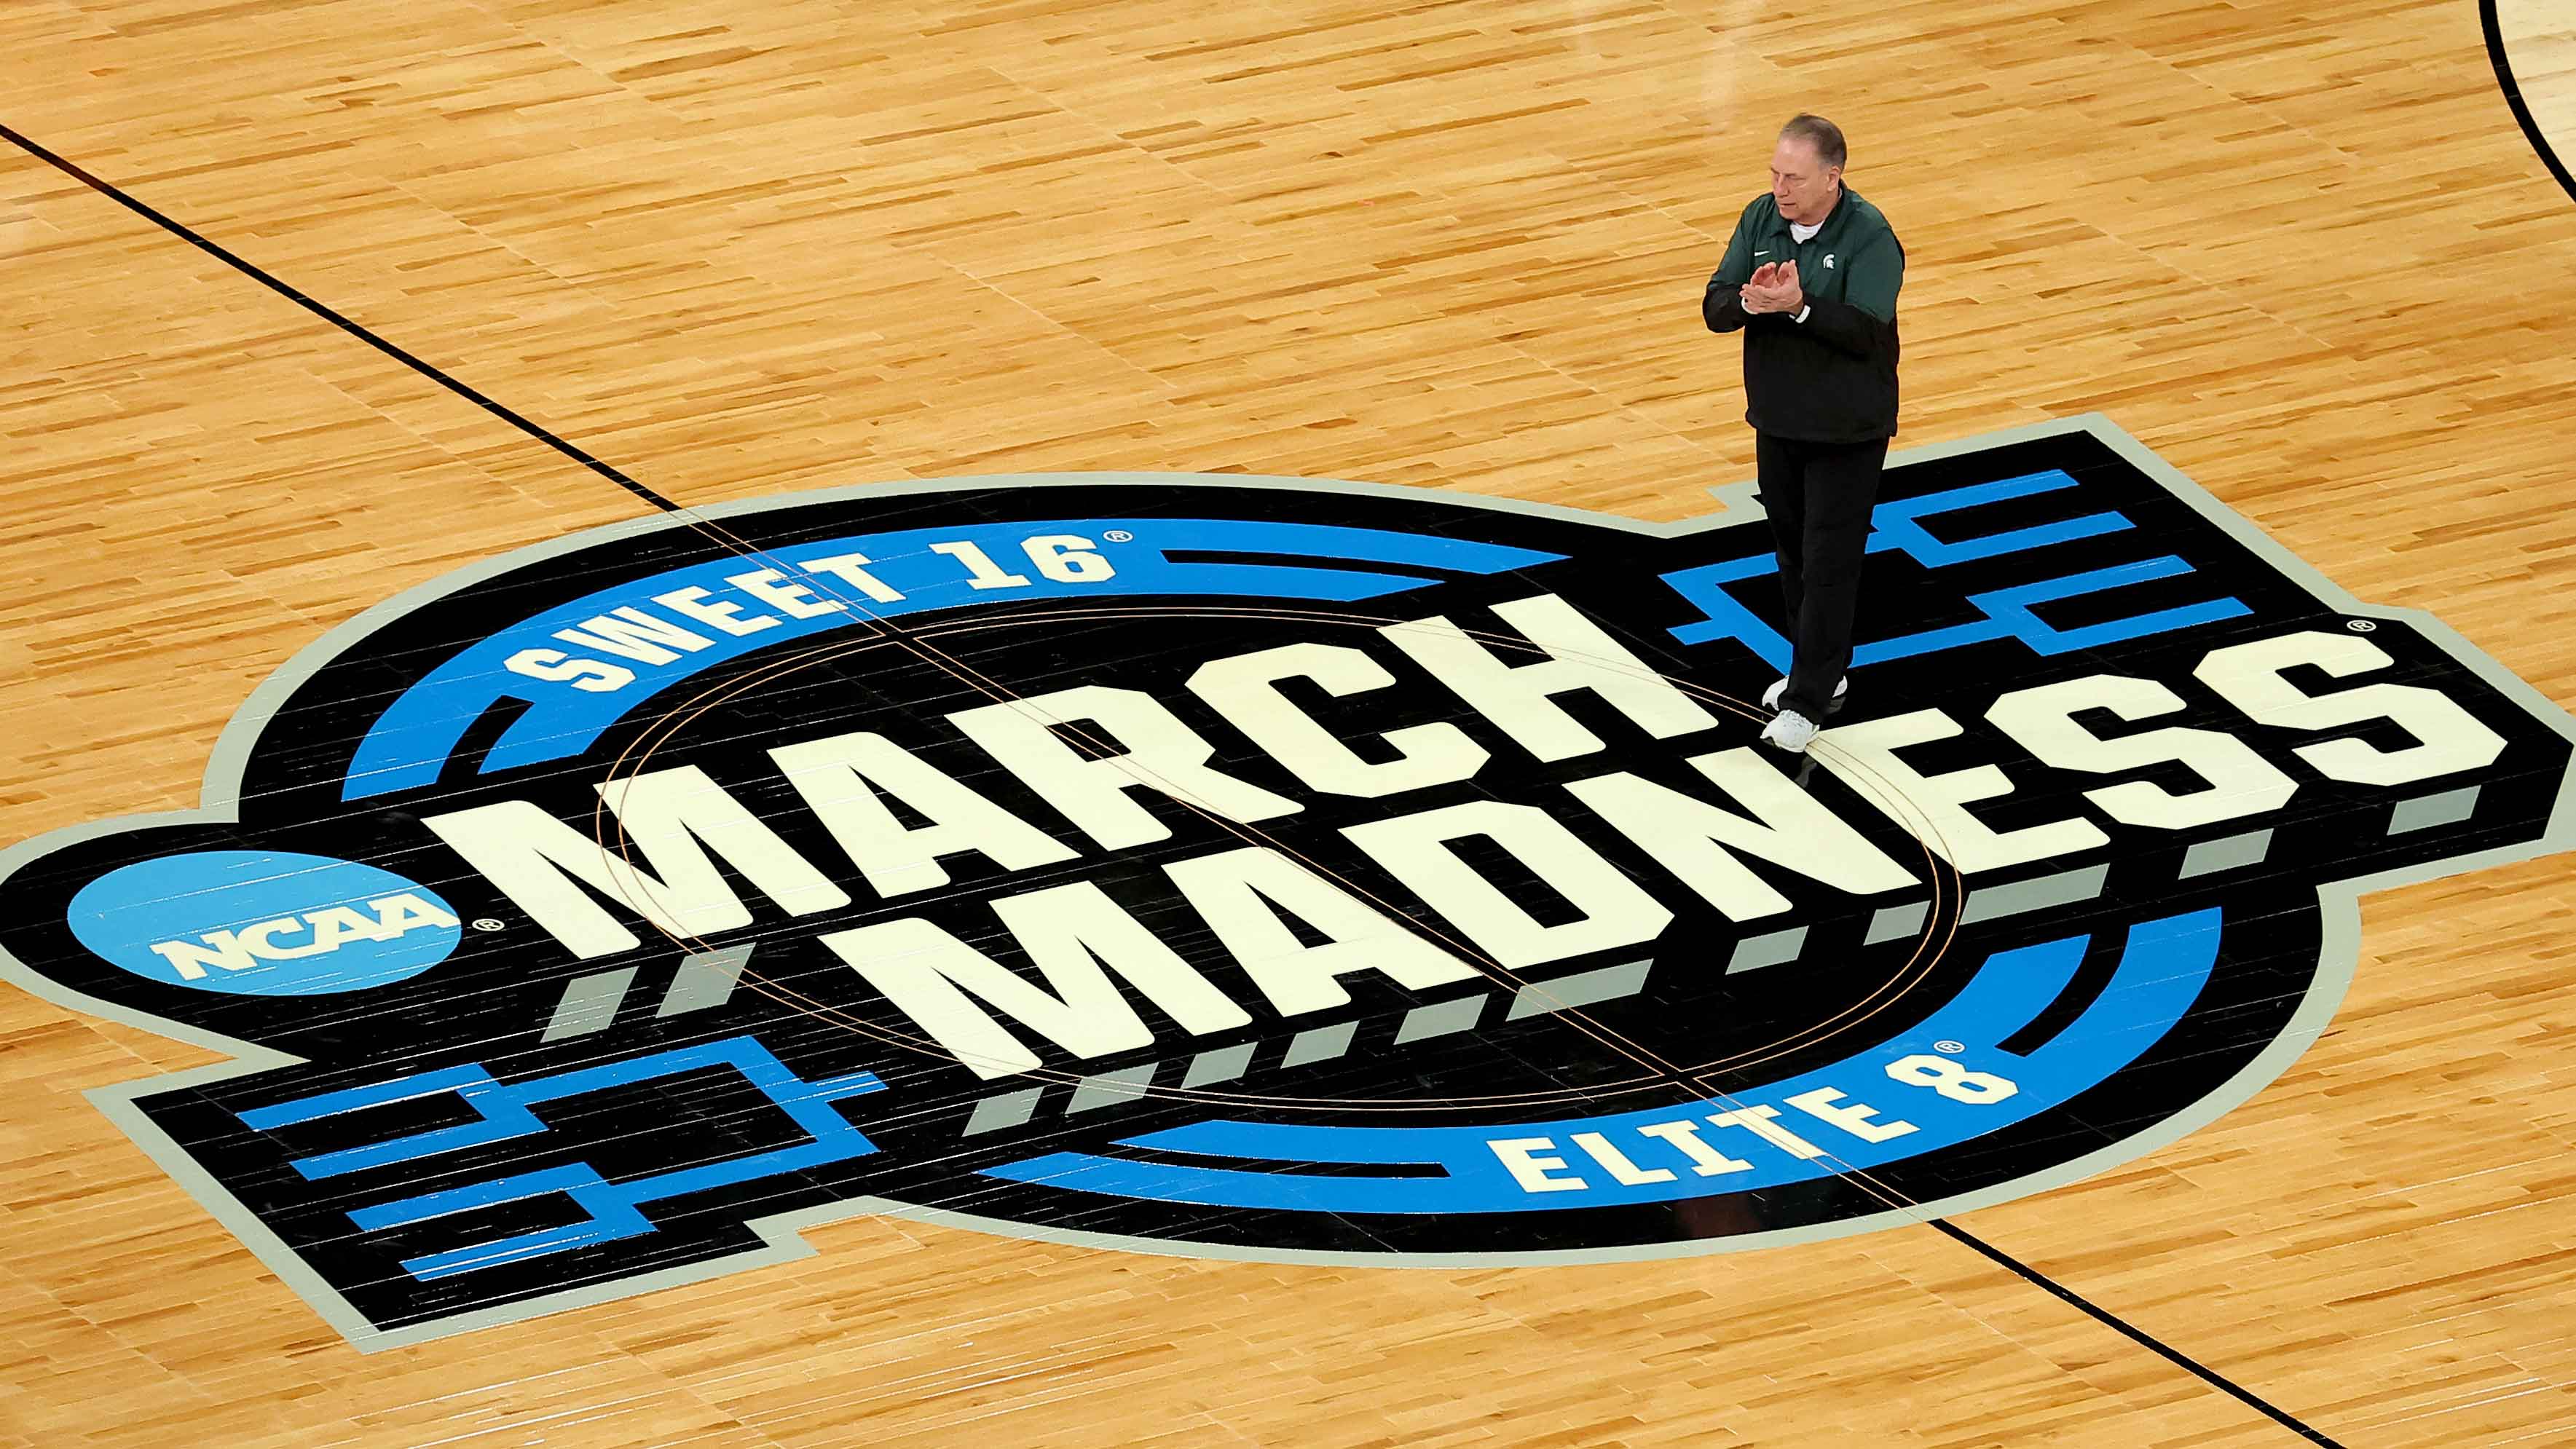 How to watch Elite 8 games in March Madness 2023